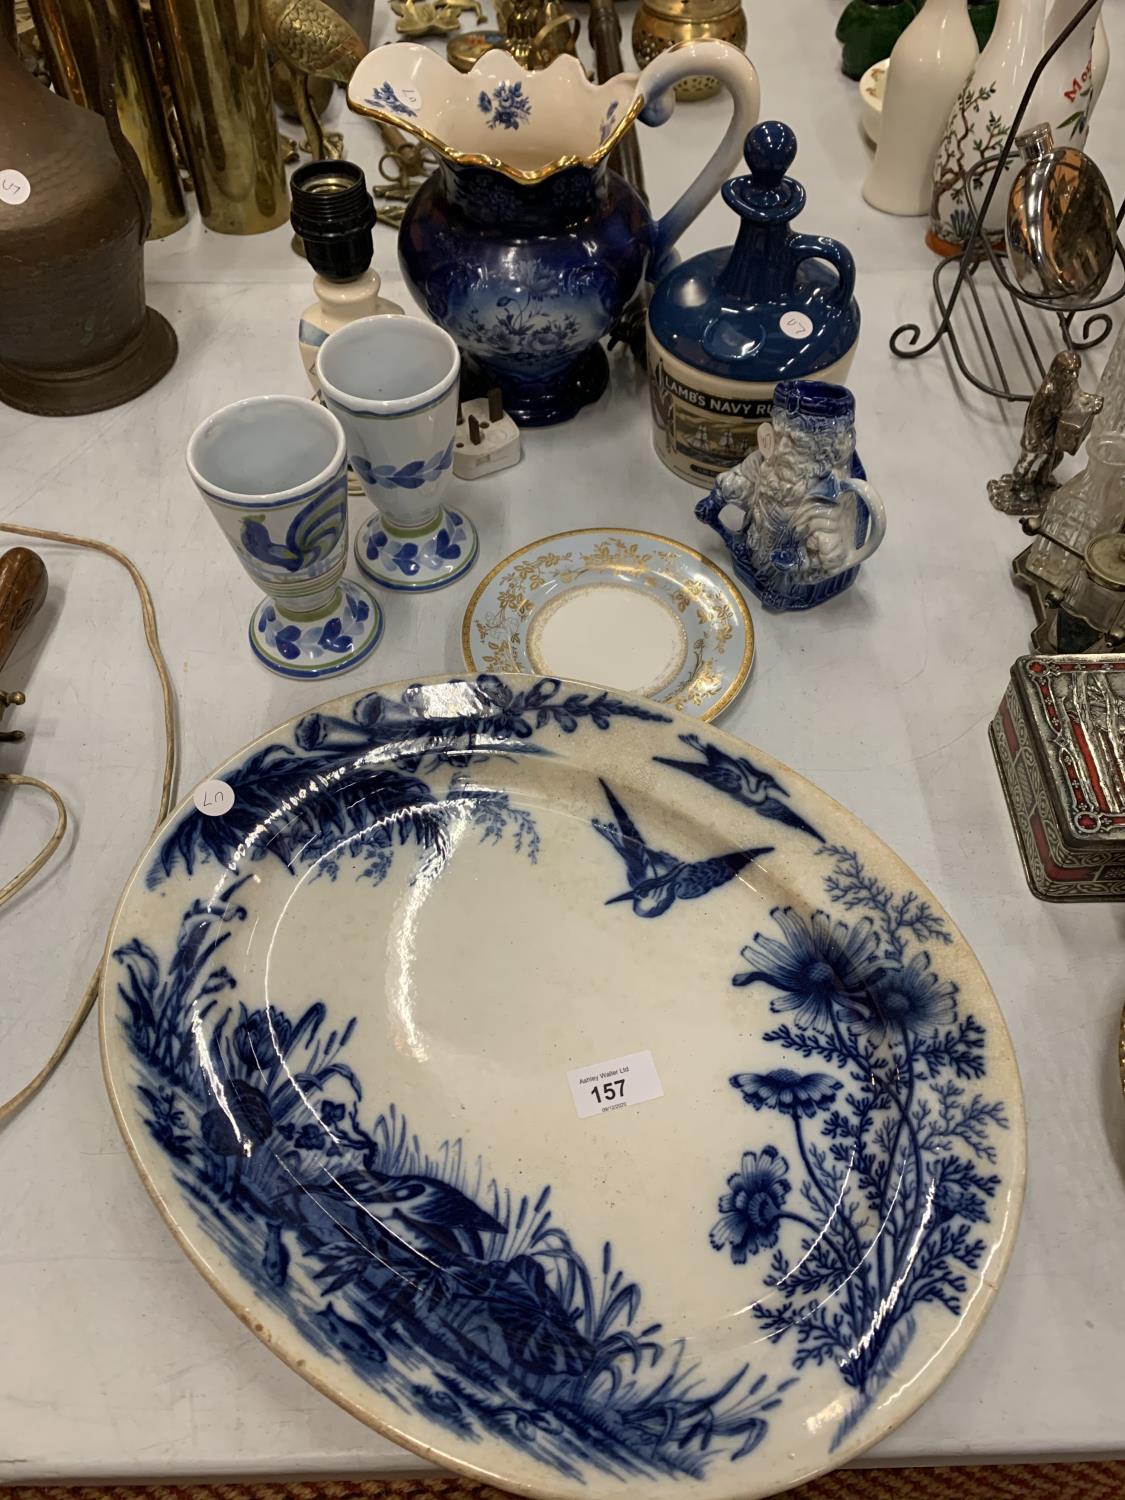 A COLLECTION OF BLUE AND WHITE CERAMIC WARE TO INCLUDE A LARGE JUG, A SERVING PLATTER AND A 'LAMBS